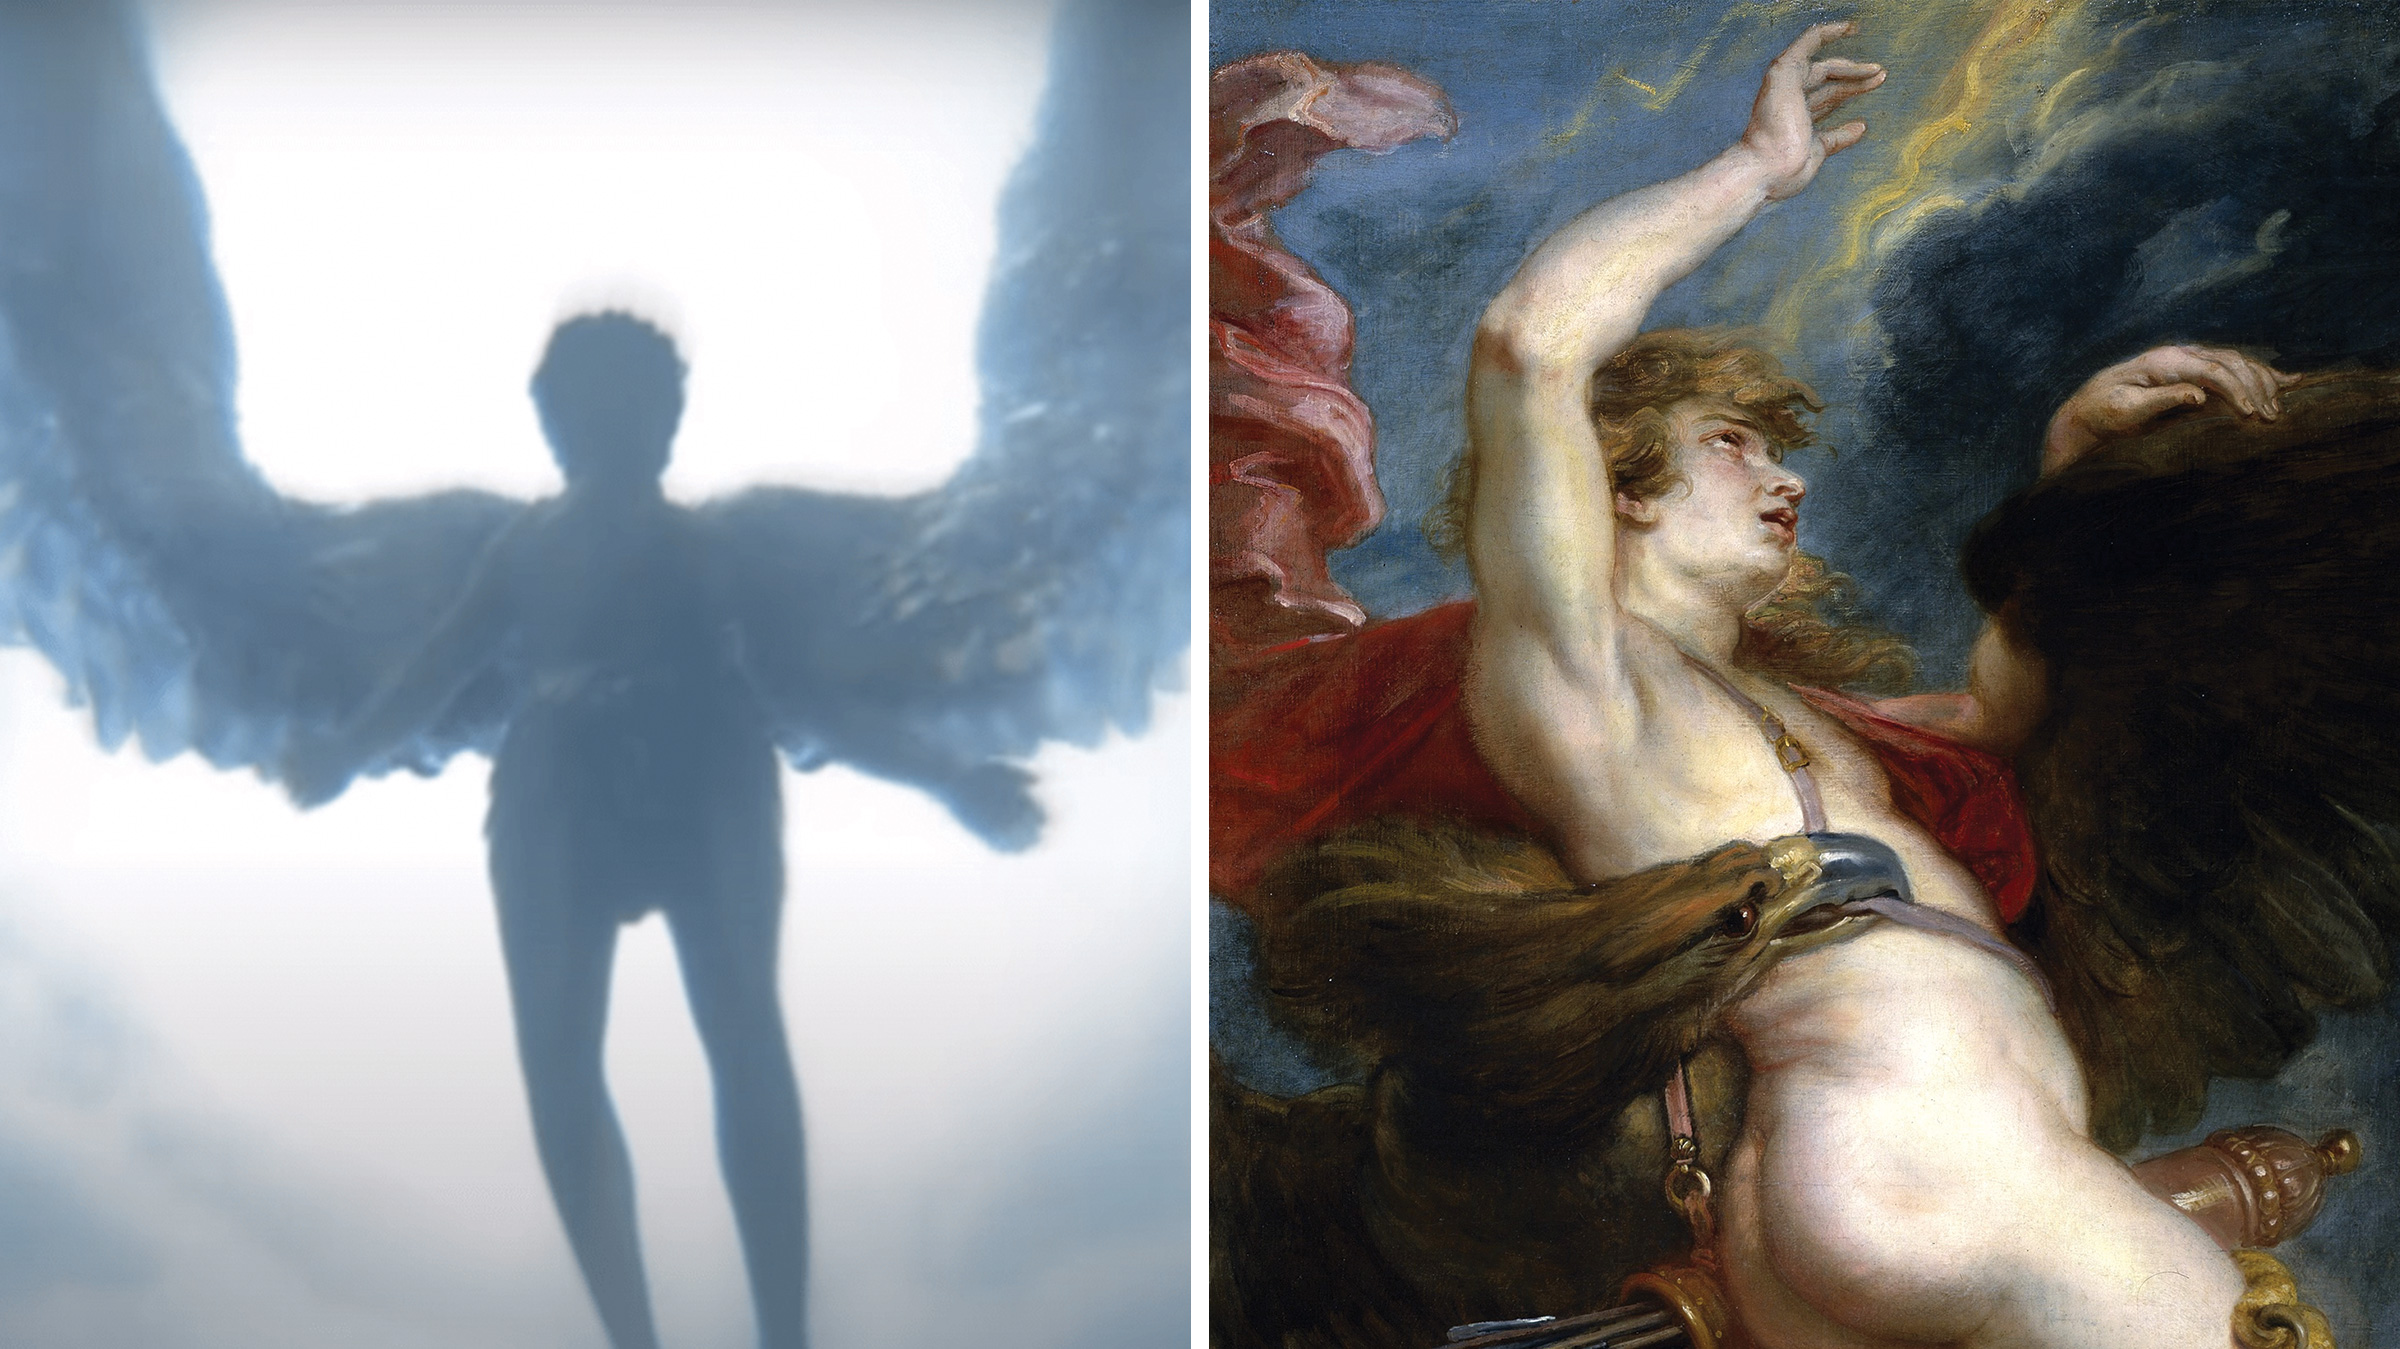 Left: An angelic figure, which resembles the Greek mythological figure Ganymede, in Lil Nas X's "Montero."; Right: The painting "The Rape of Ganymede" by Rubens. (YouTube; Commons)